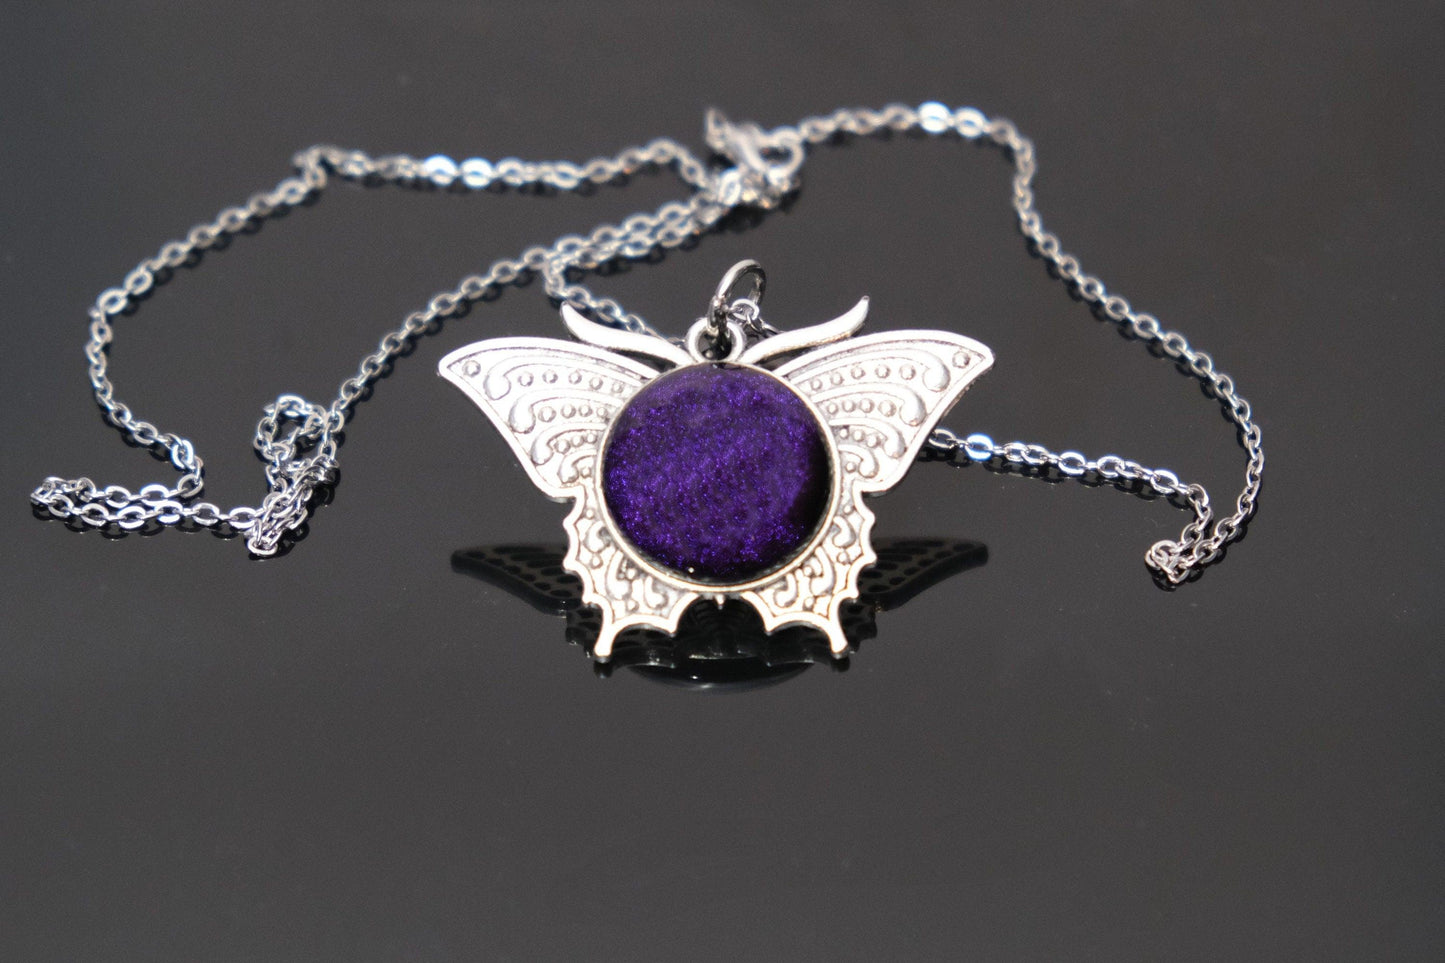 Butterfly pendant necklace, silver tone with dark purple dichroic fused glass center stone on a 20 inch steel chain seeds glassworks seedsglassworks